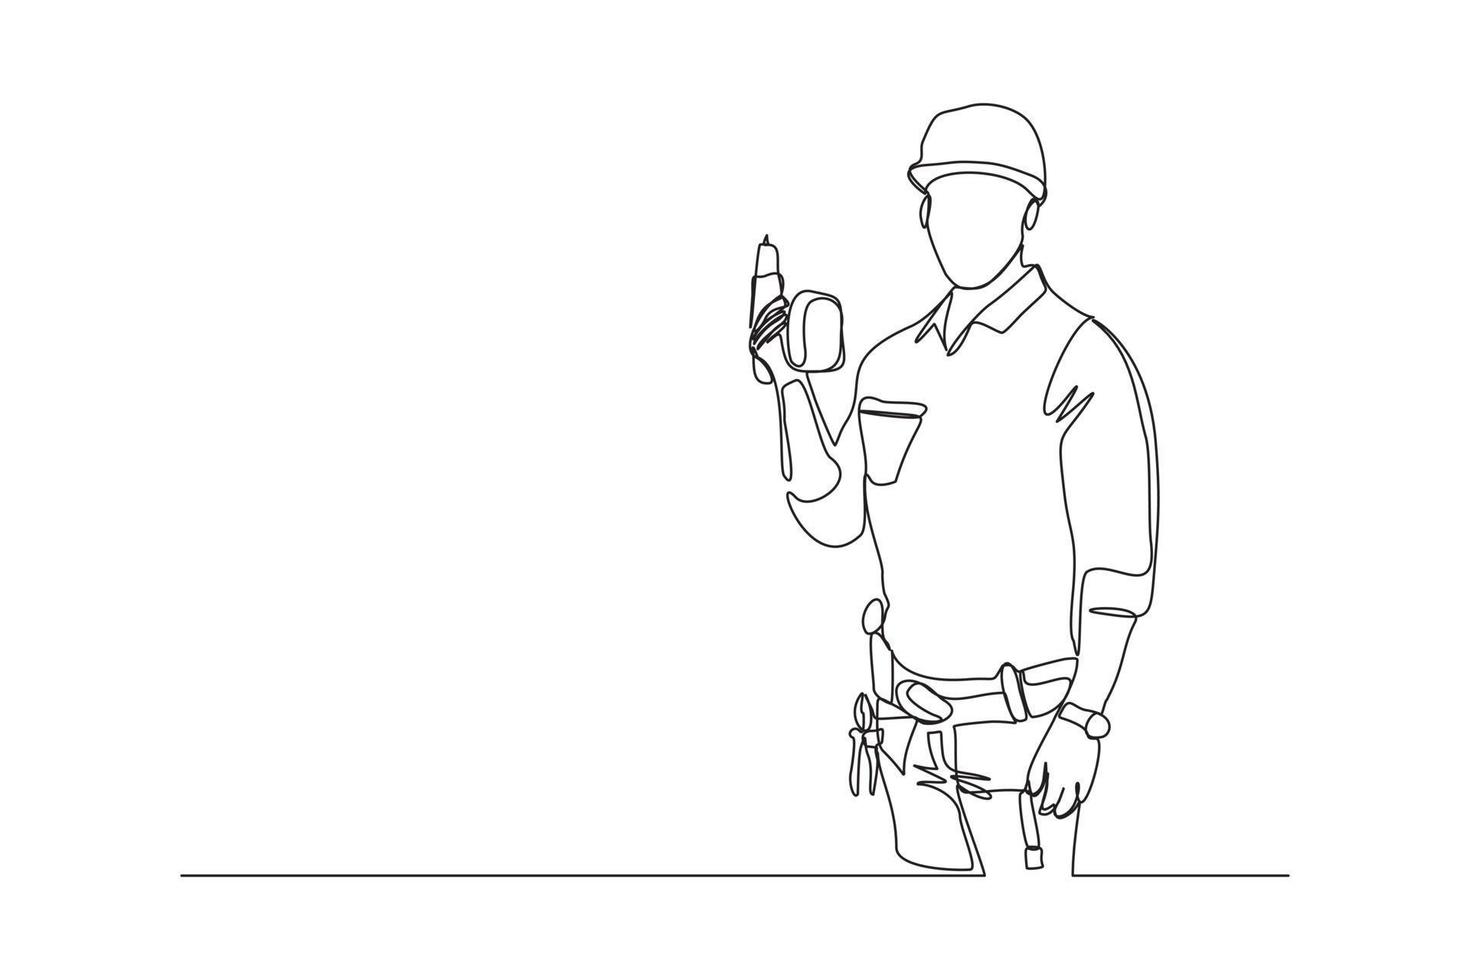 Continuous line drawing of young handyman wearing uniform while holding drill machine. Single one line art of repairman construction maintenance service concept. Vector illustration